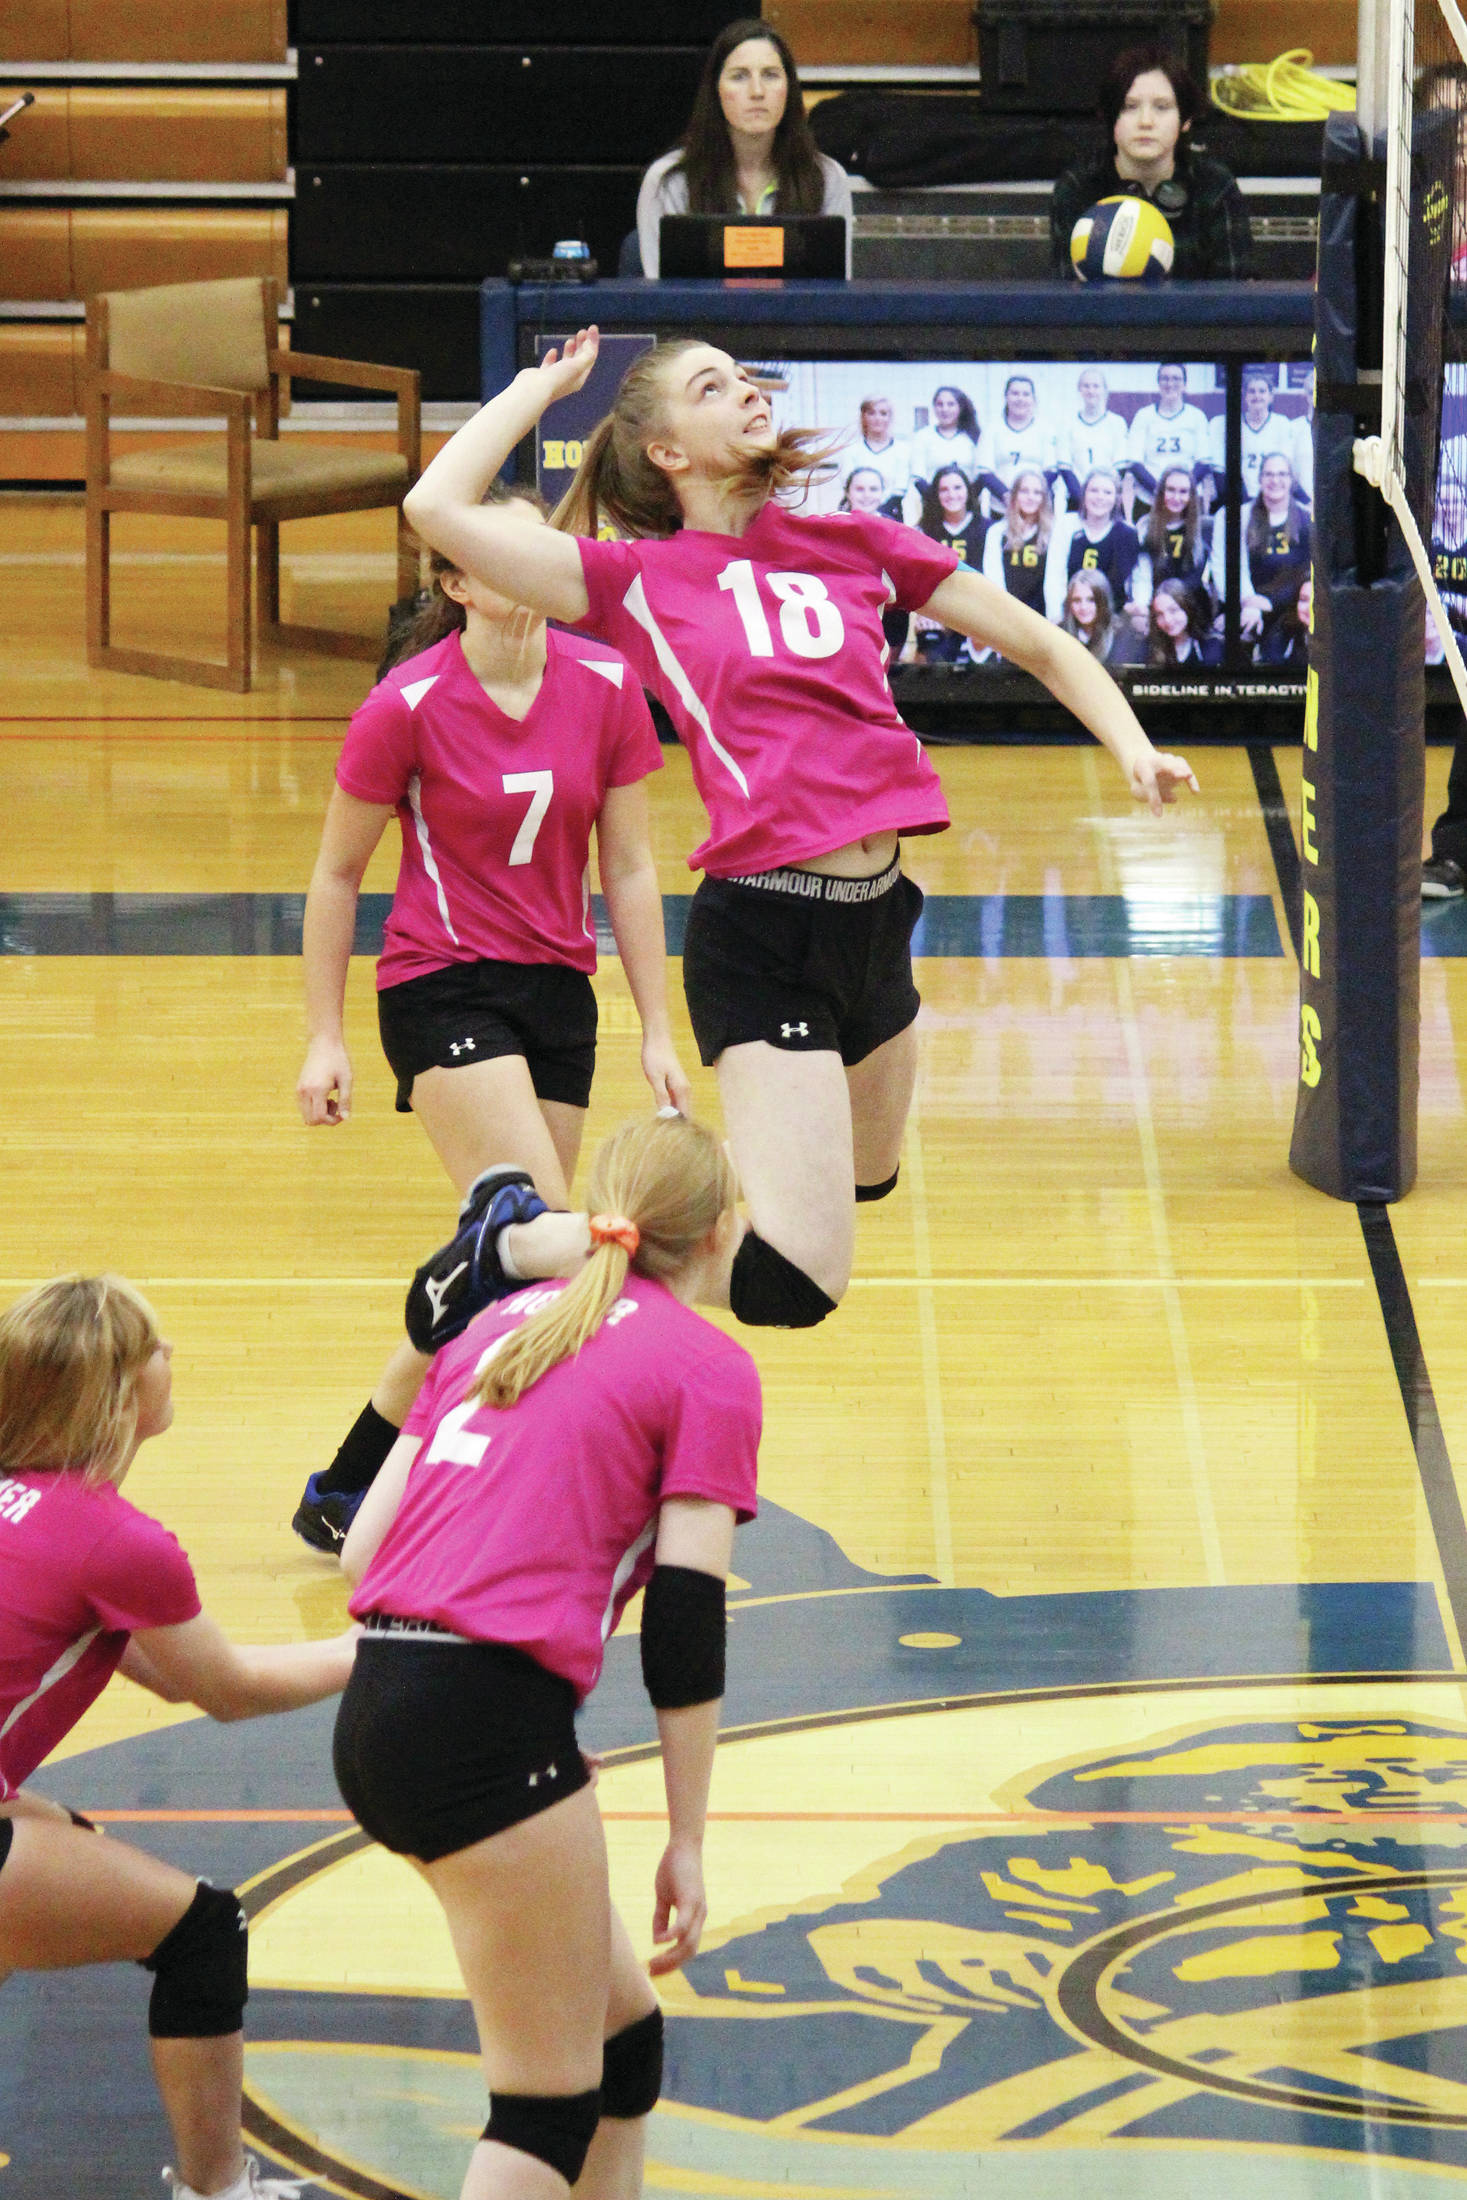 Homer’s Karmyn Gallios jumps to spike the ball during a Friday, Oct. 18, 2019 volleyball game against Seward High School in the Alice Witte Gymnasium in Homer, Alaska. (Photo by Megan Pacer/Homer News)